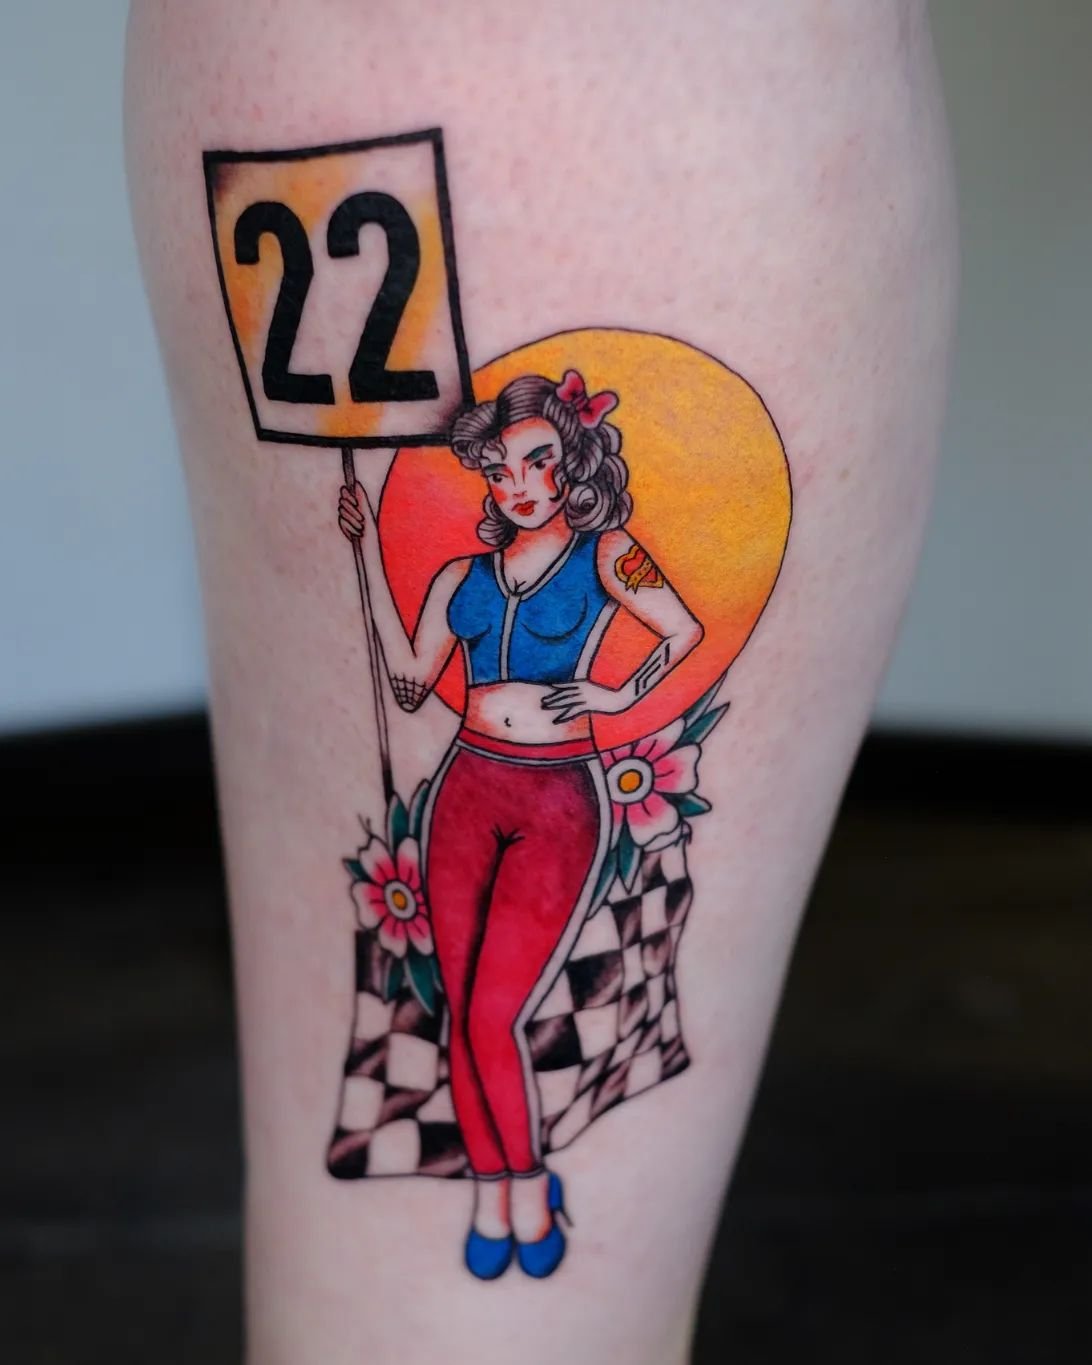 F1 gridgirl pin up made today for Lindsay, complete with Jenson Buttons driver number 🏎️💨🏁

Thank you so much for letting me add to your collection 🥰

&bull;&bull;&bull;&bull;&bull;&bull;&bull;&bull;&bull;&bull;&bull;&bull;&bull;&bull;&bull;&bull